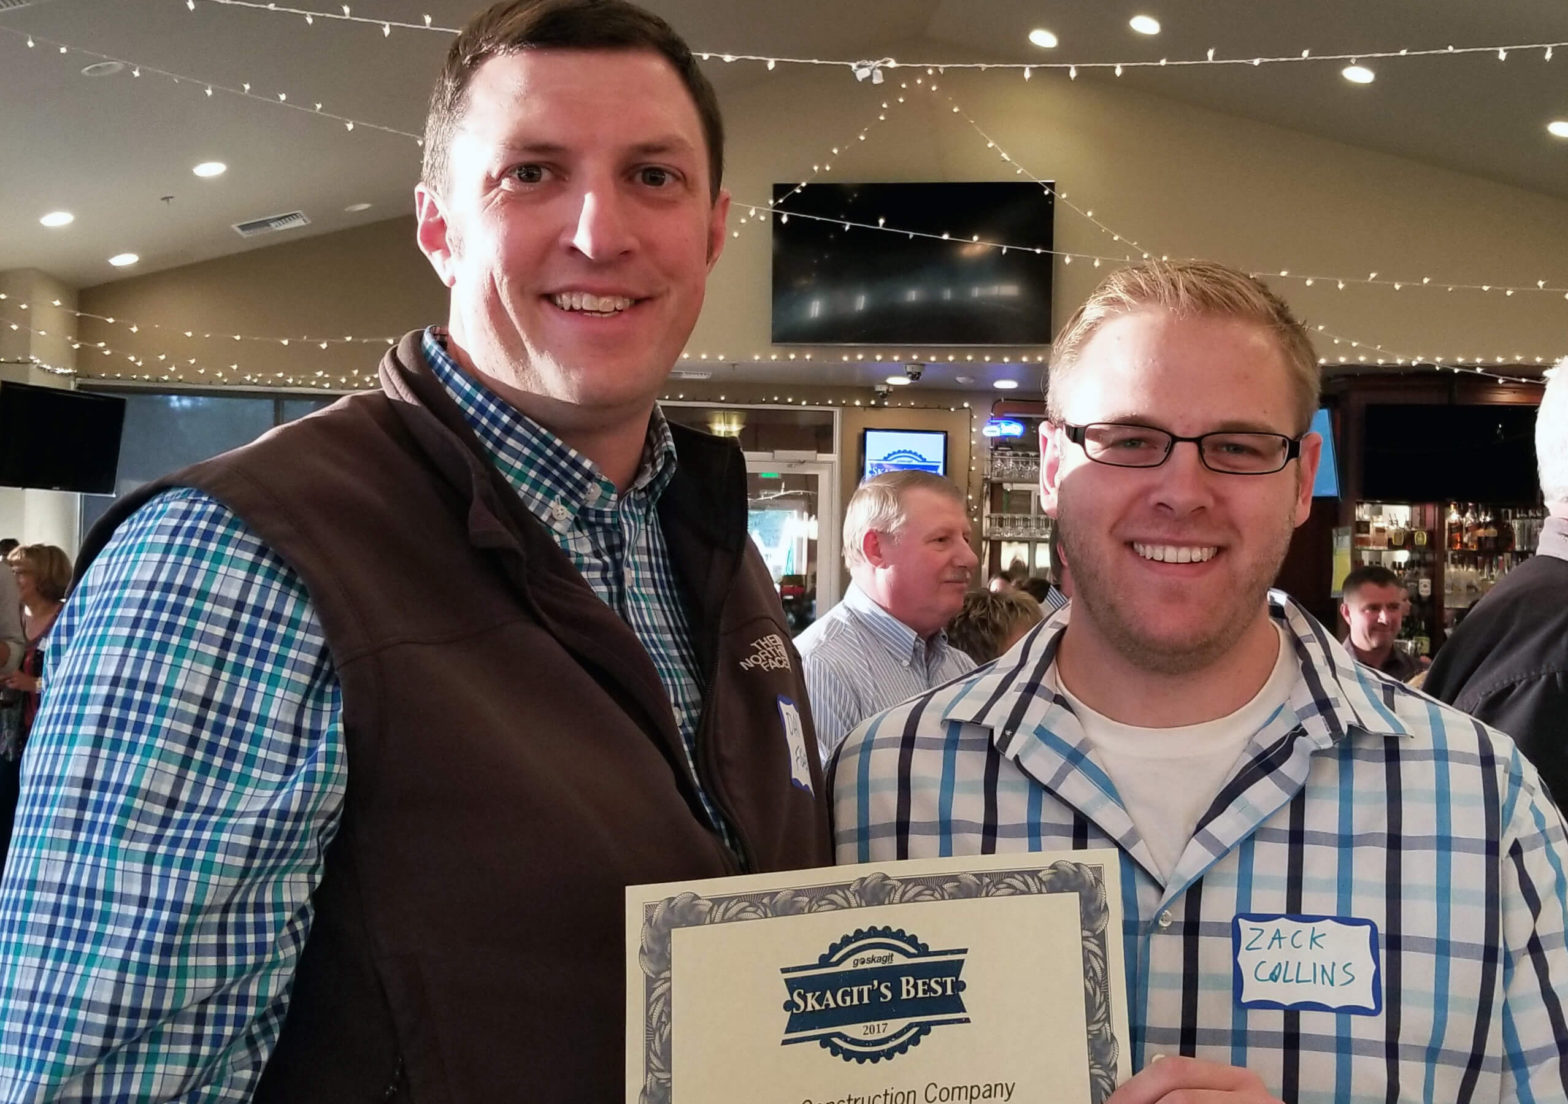 Dan Fisher and Zack Collins accept Best Construction Company award for Chad Fisher Construction